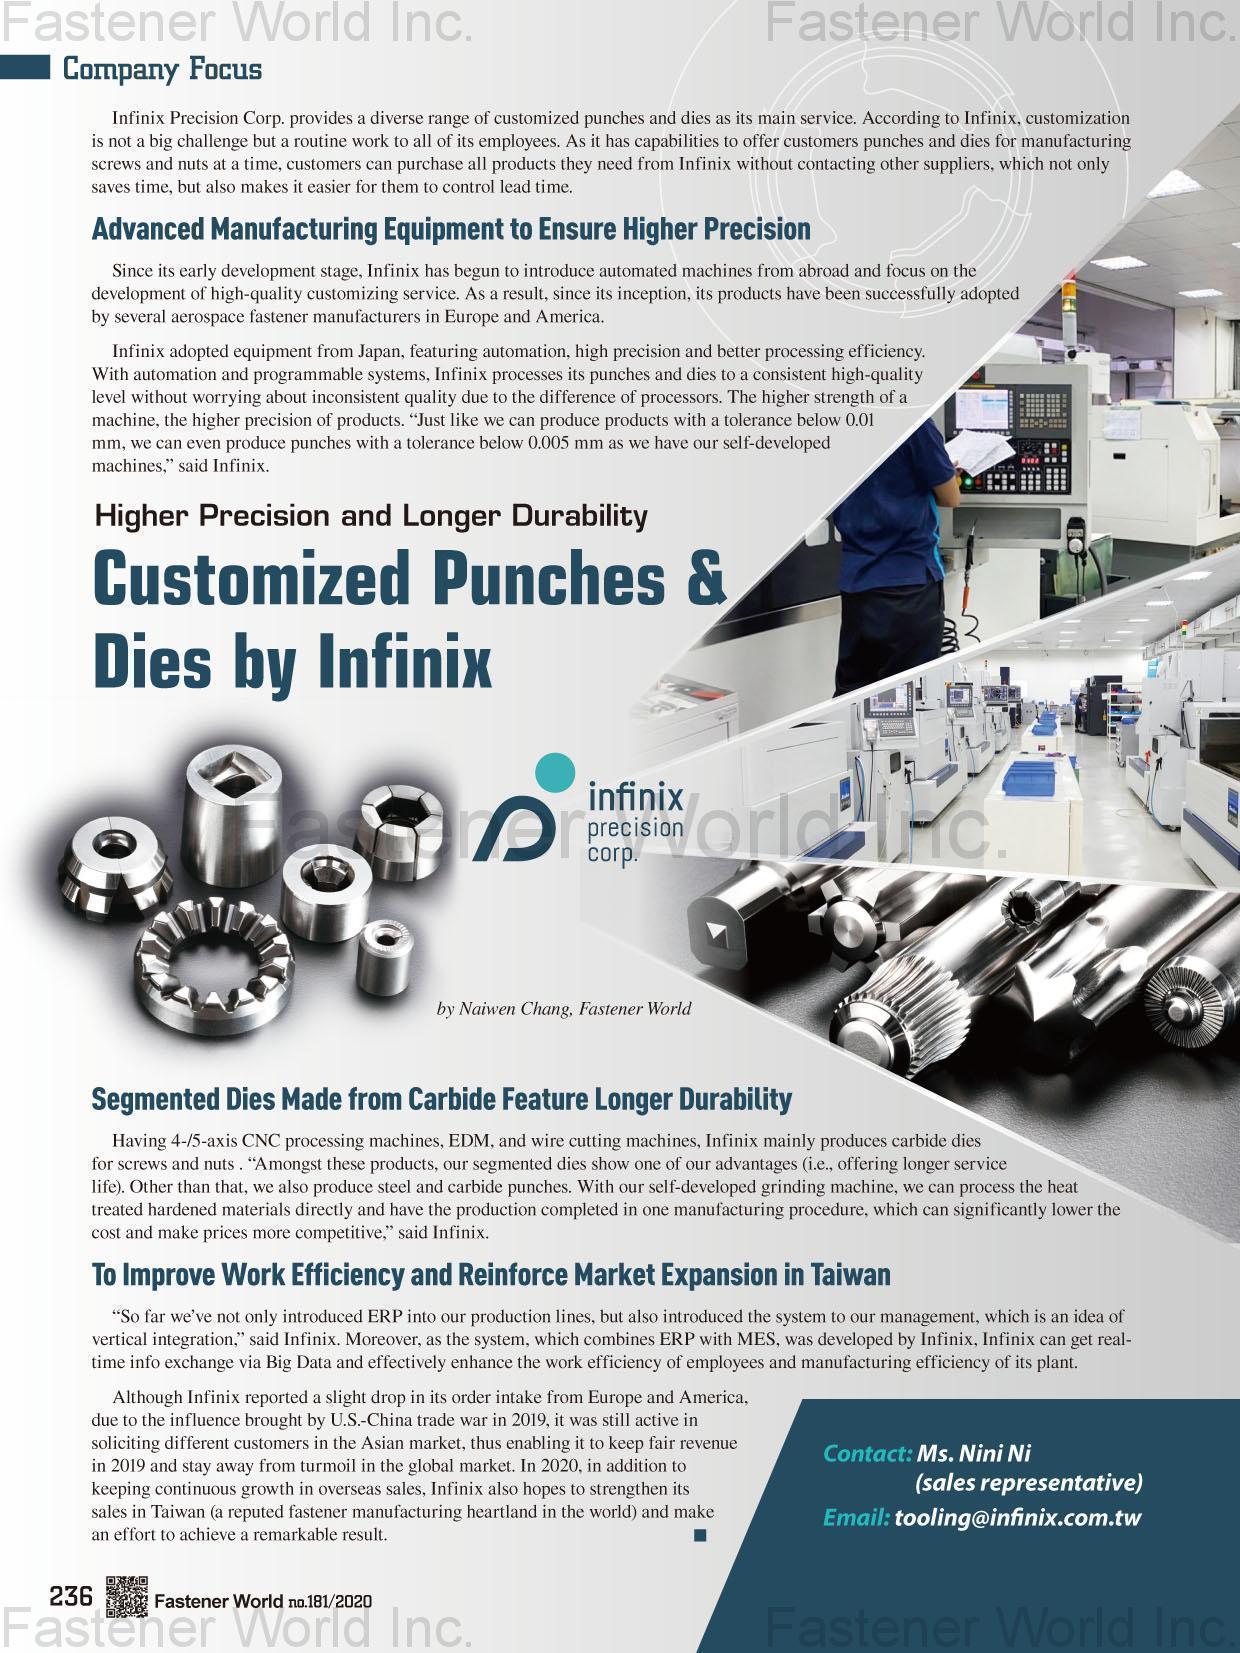 INFINIX PRECISION CORP. , Customized Punches & Dies by Infinix , Molds & Dies